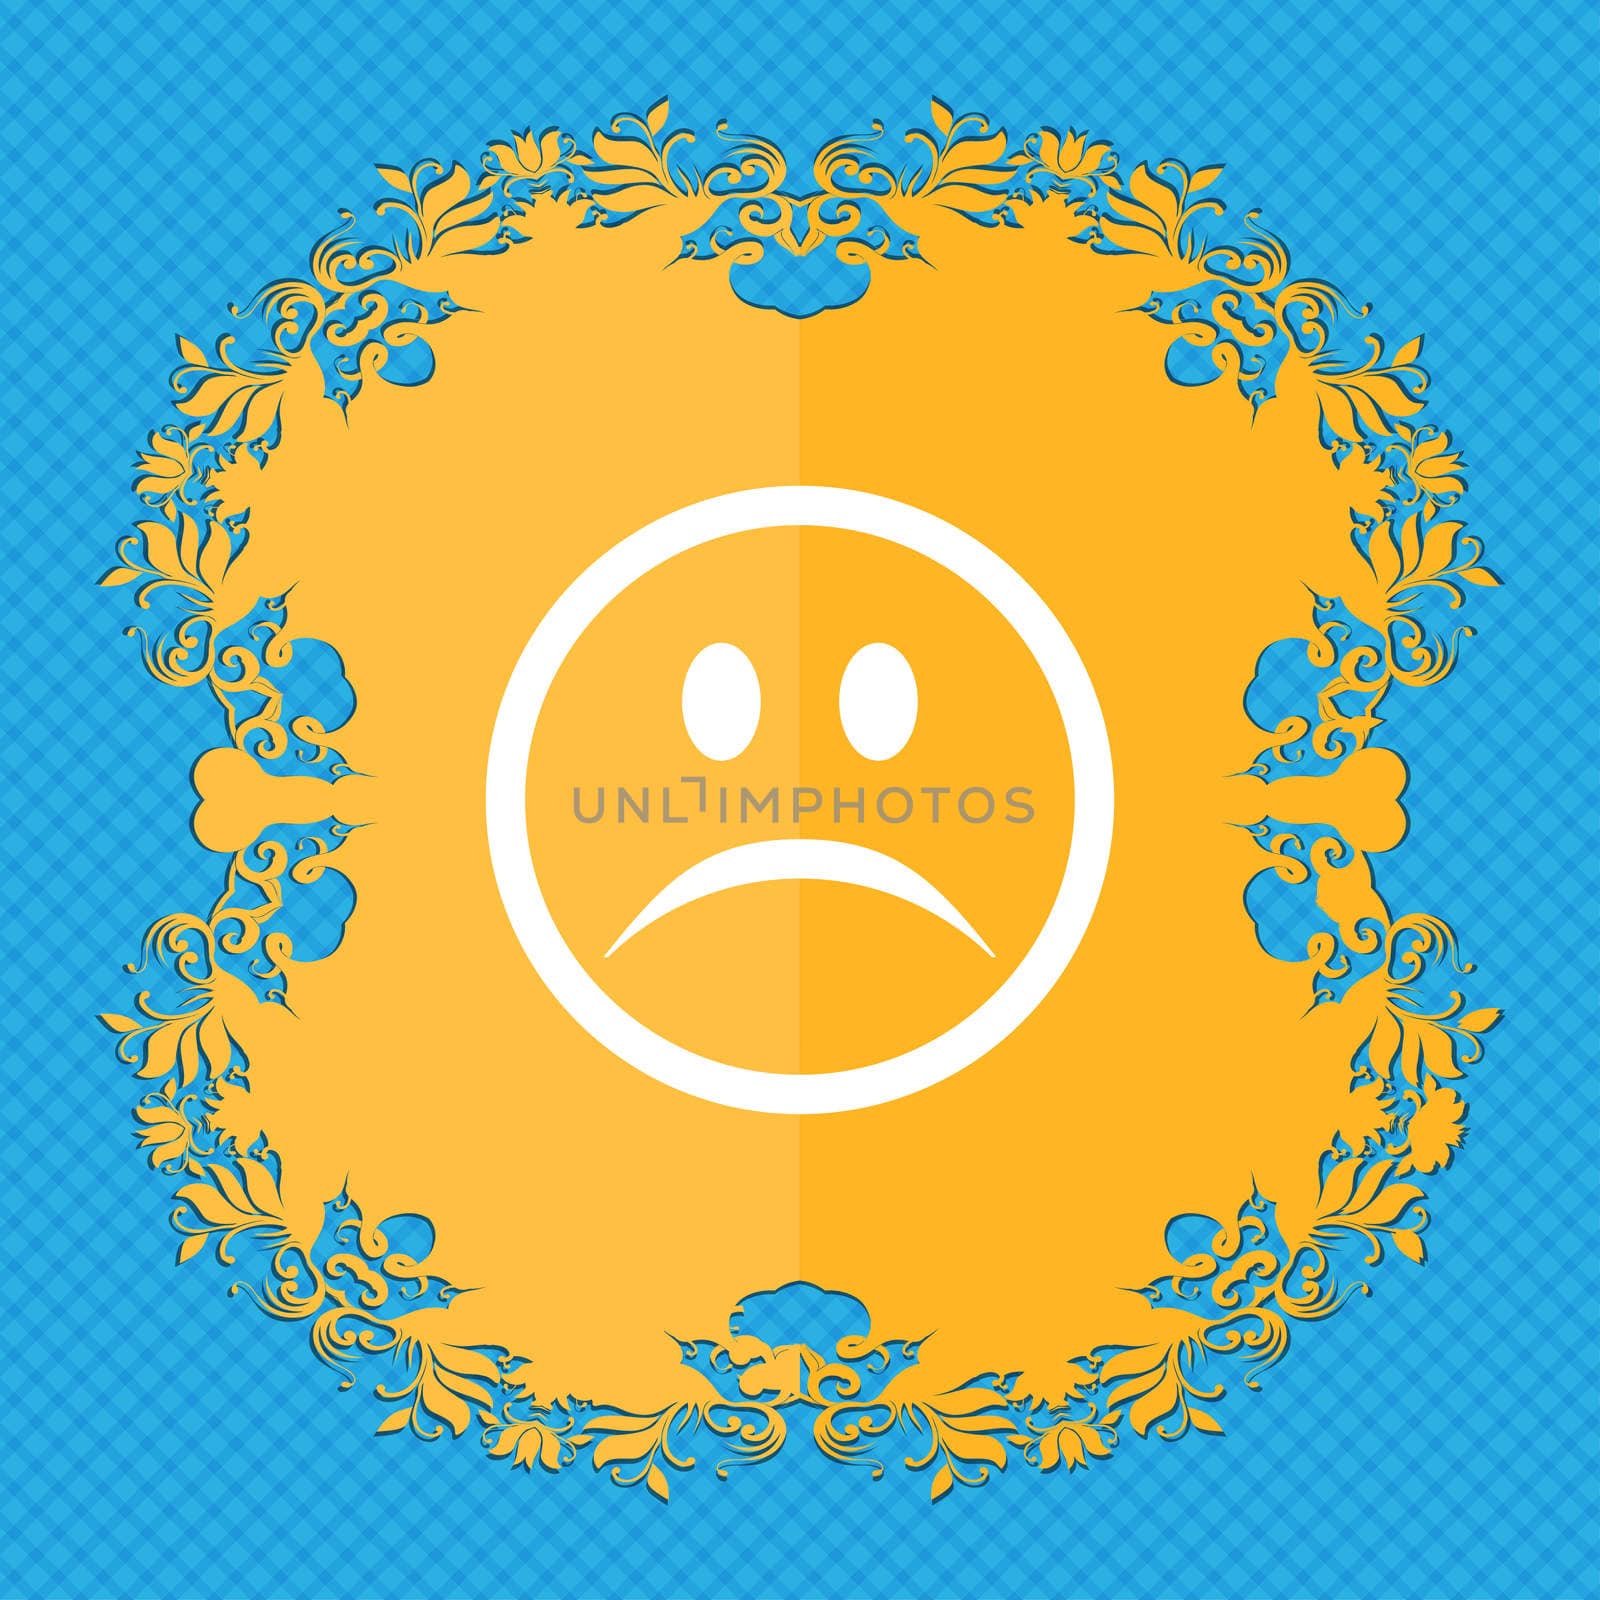 Sad face, Sadness depression . Floral flat design on a blue abstract background with place for your text. illustration